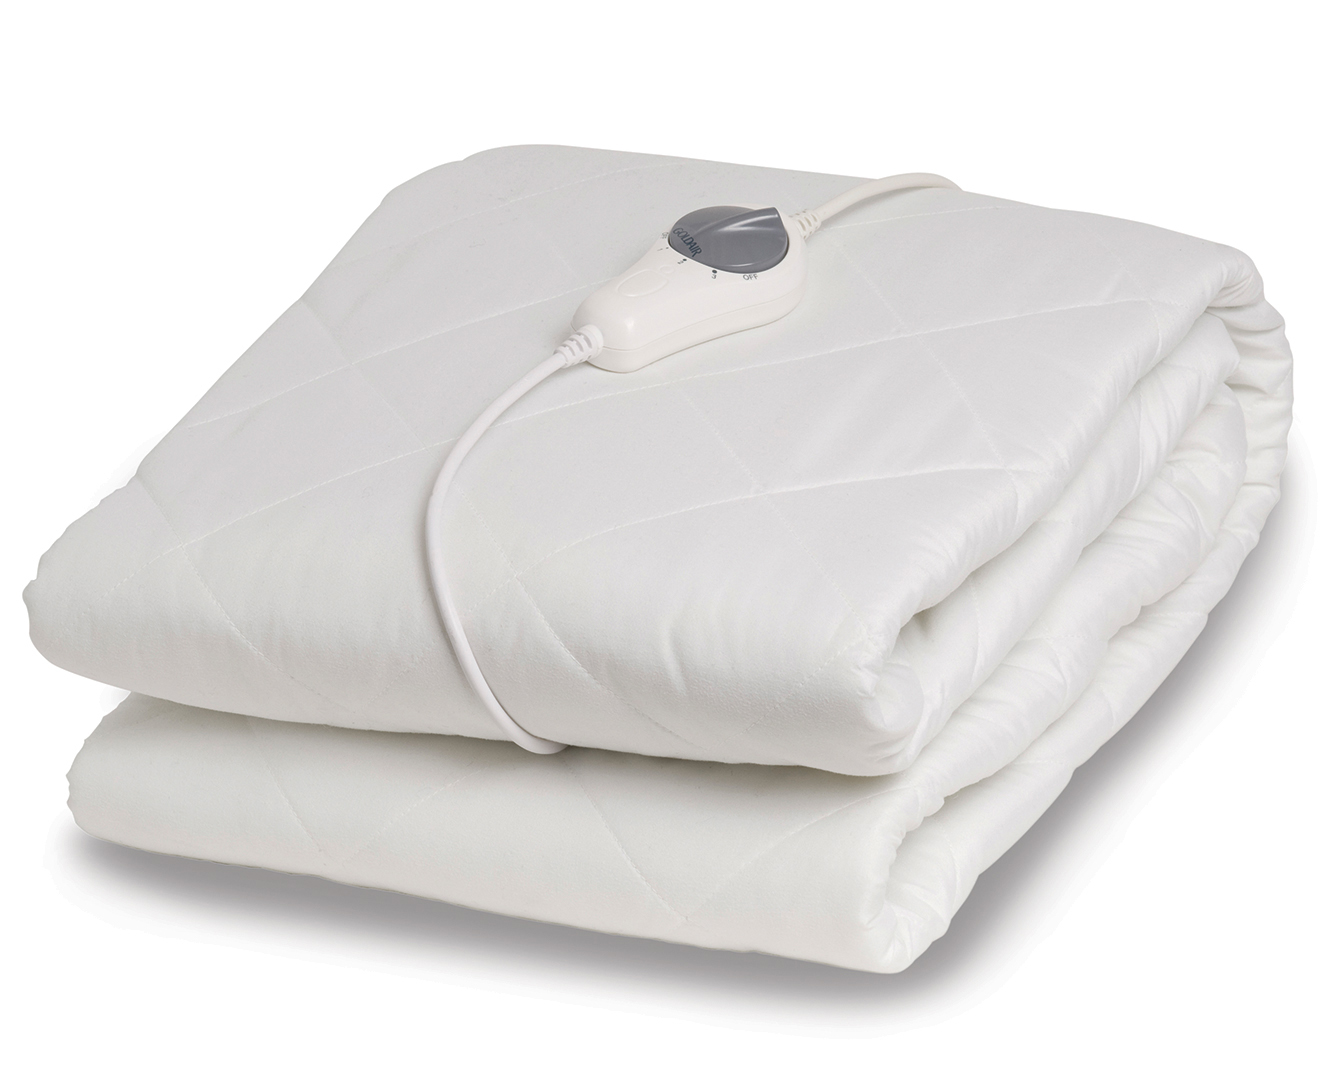 mattress protector electric blanket first